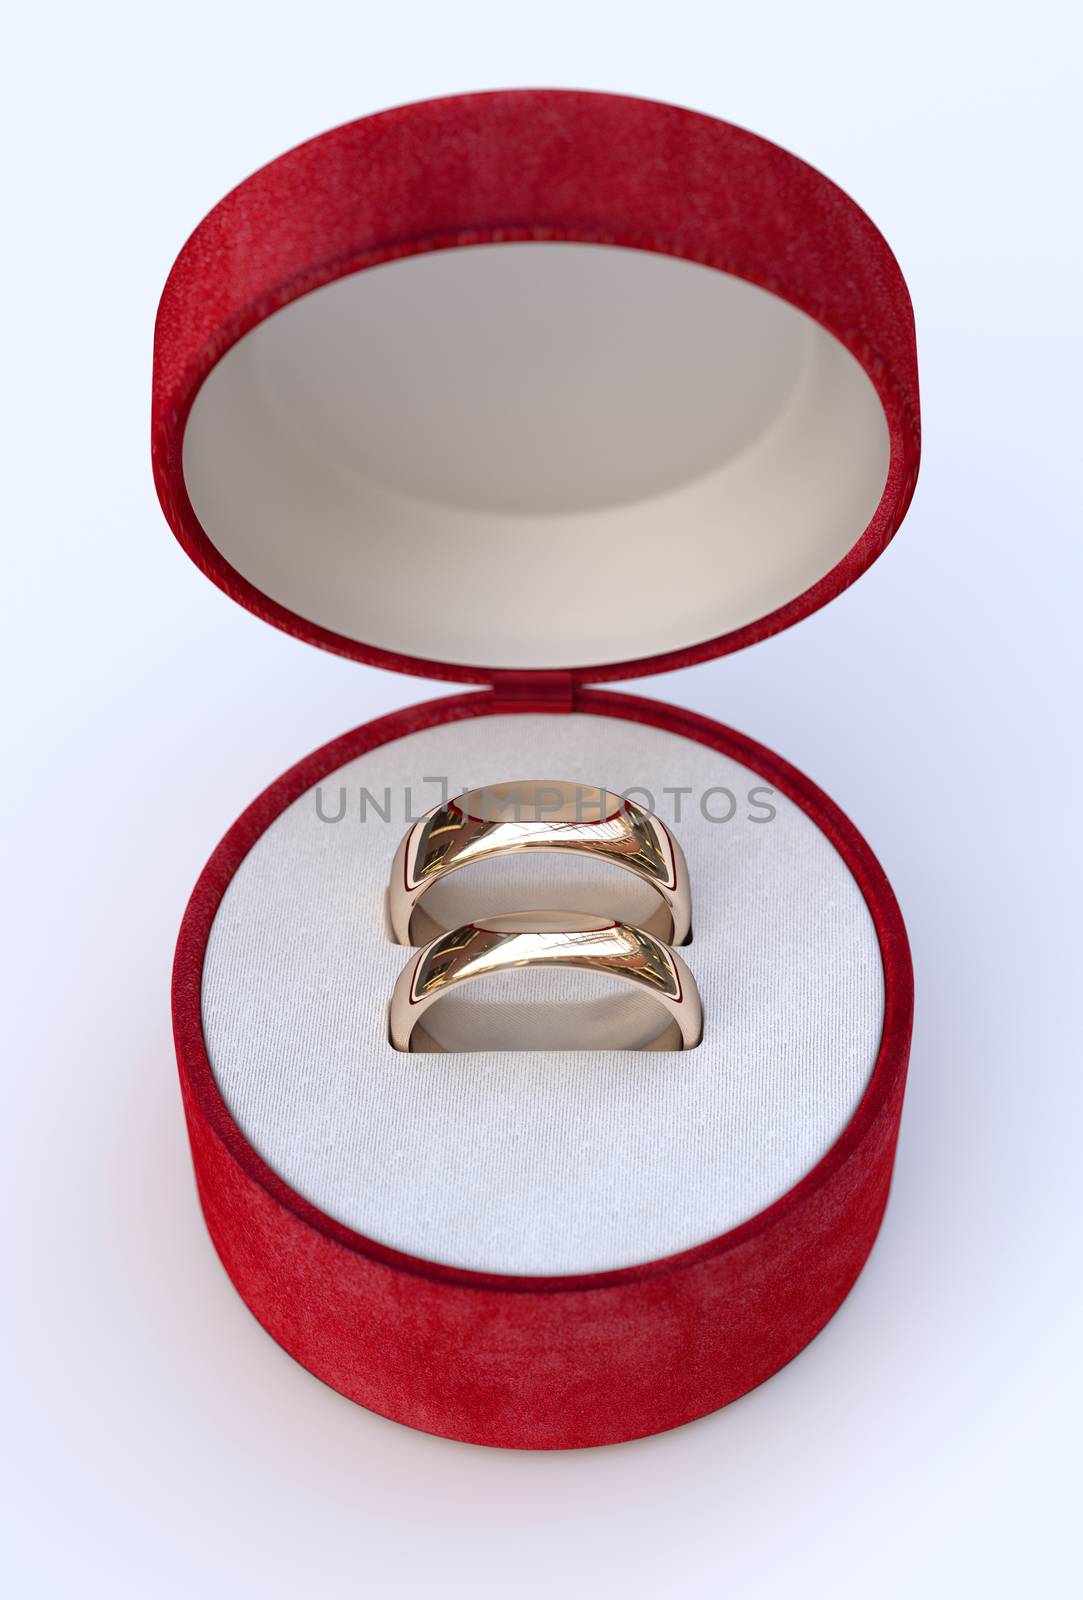 Couple of gold wedding rings  in jewelry red box  by Barbraford